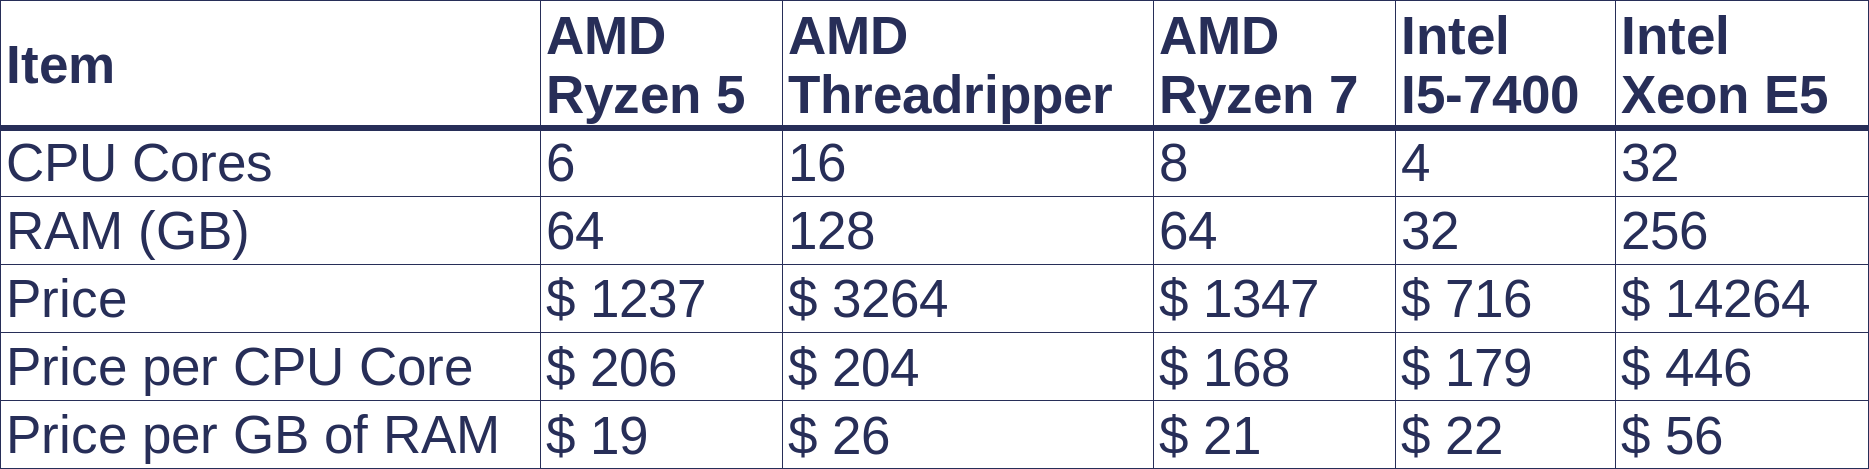 Cost analysis for various CPU